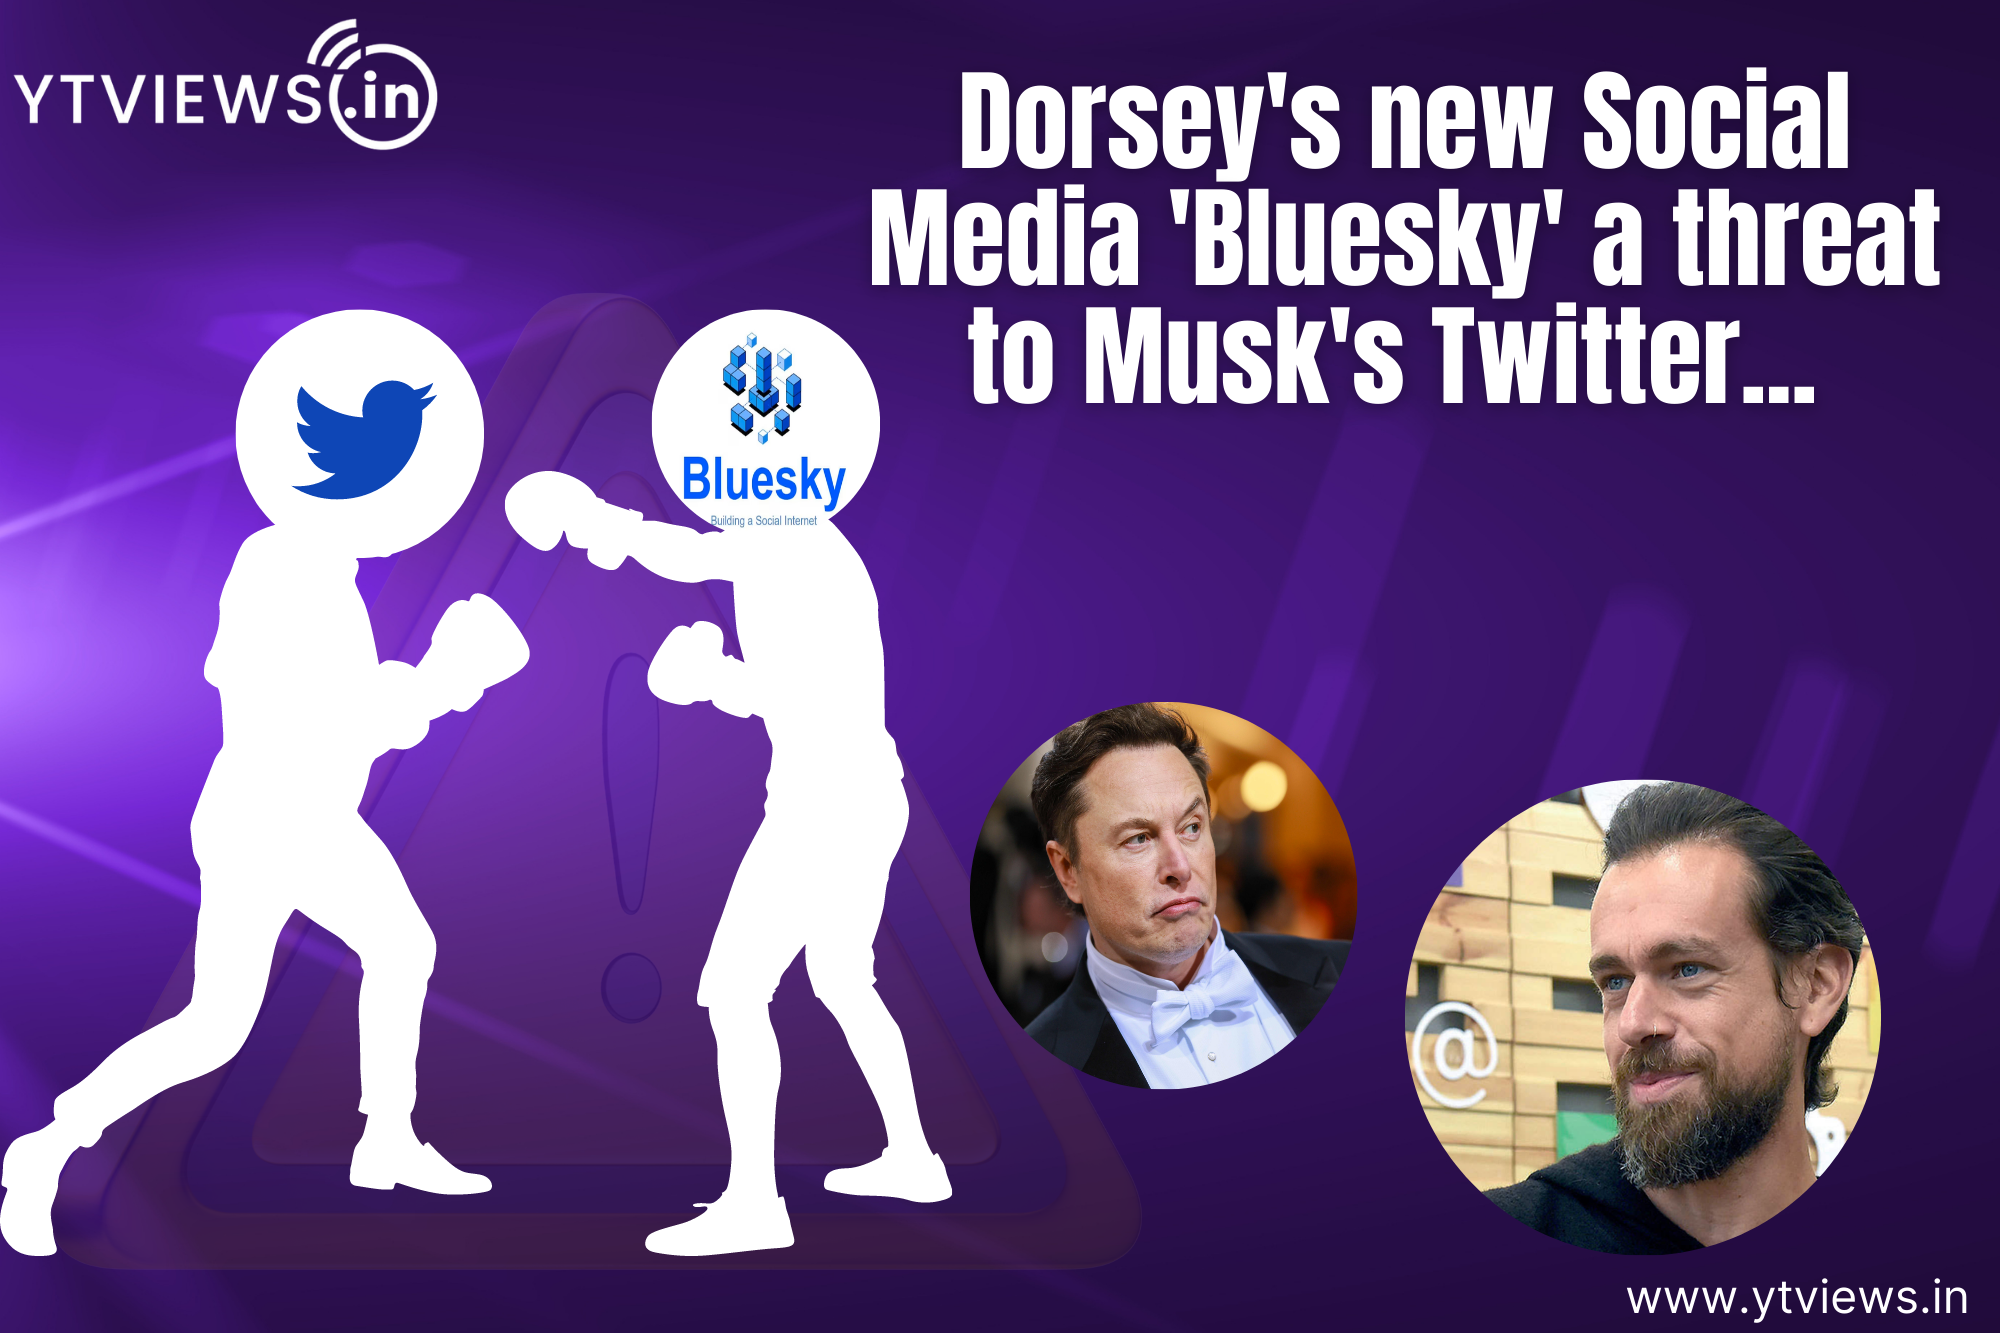 Is the Twitter co-founder Jack Dorsey’s new social media ‘Bluesky’ a threat to Musk’s Twitter?